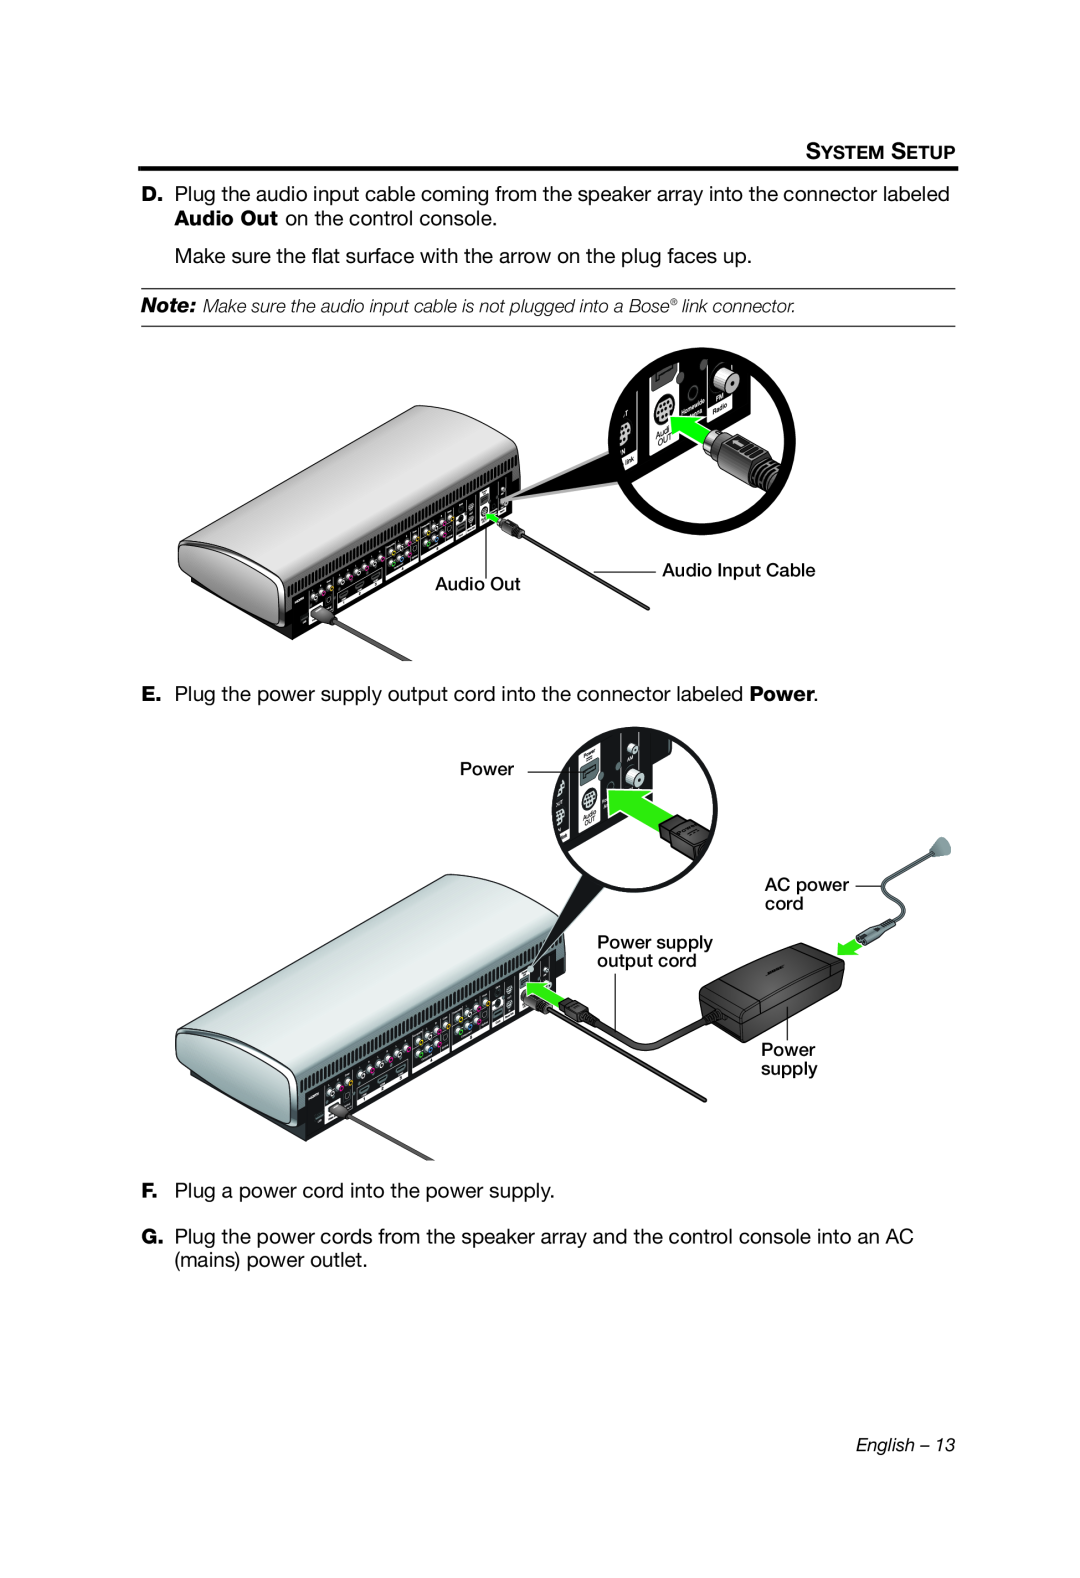 Bose 135 setup guide F.Plug a power cord into the power supply 